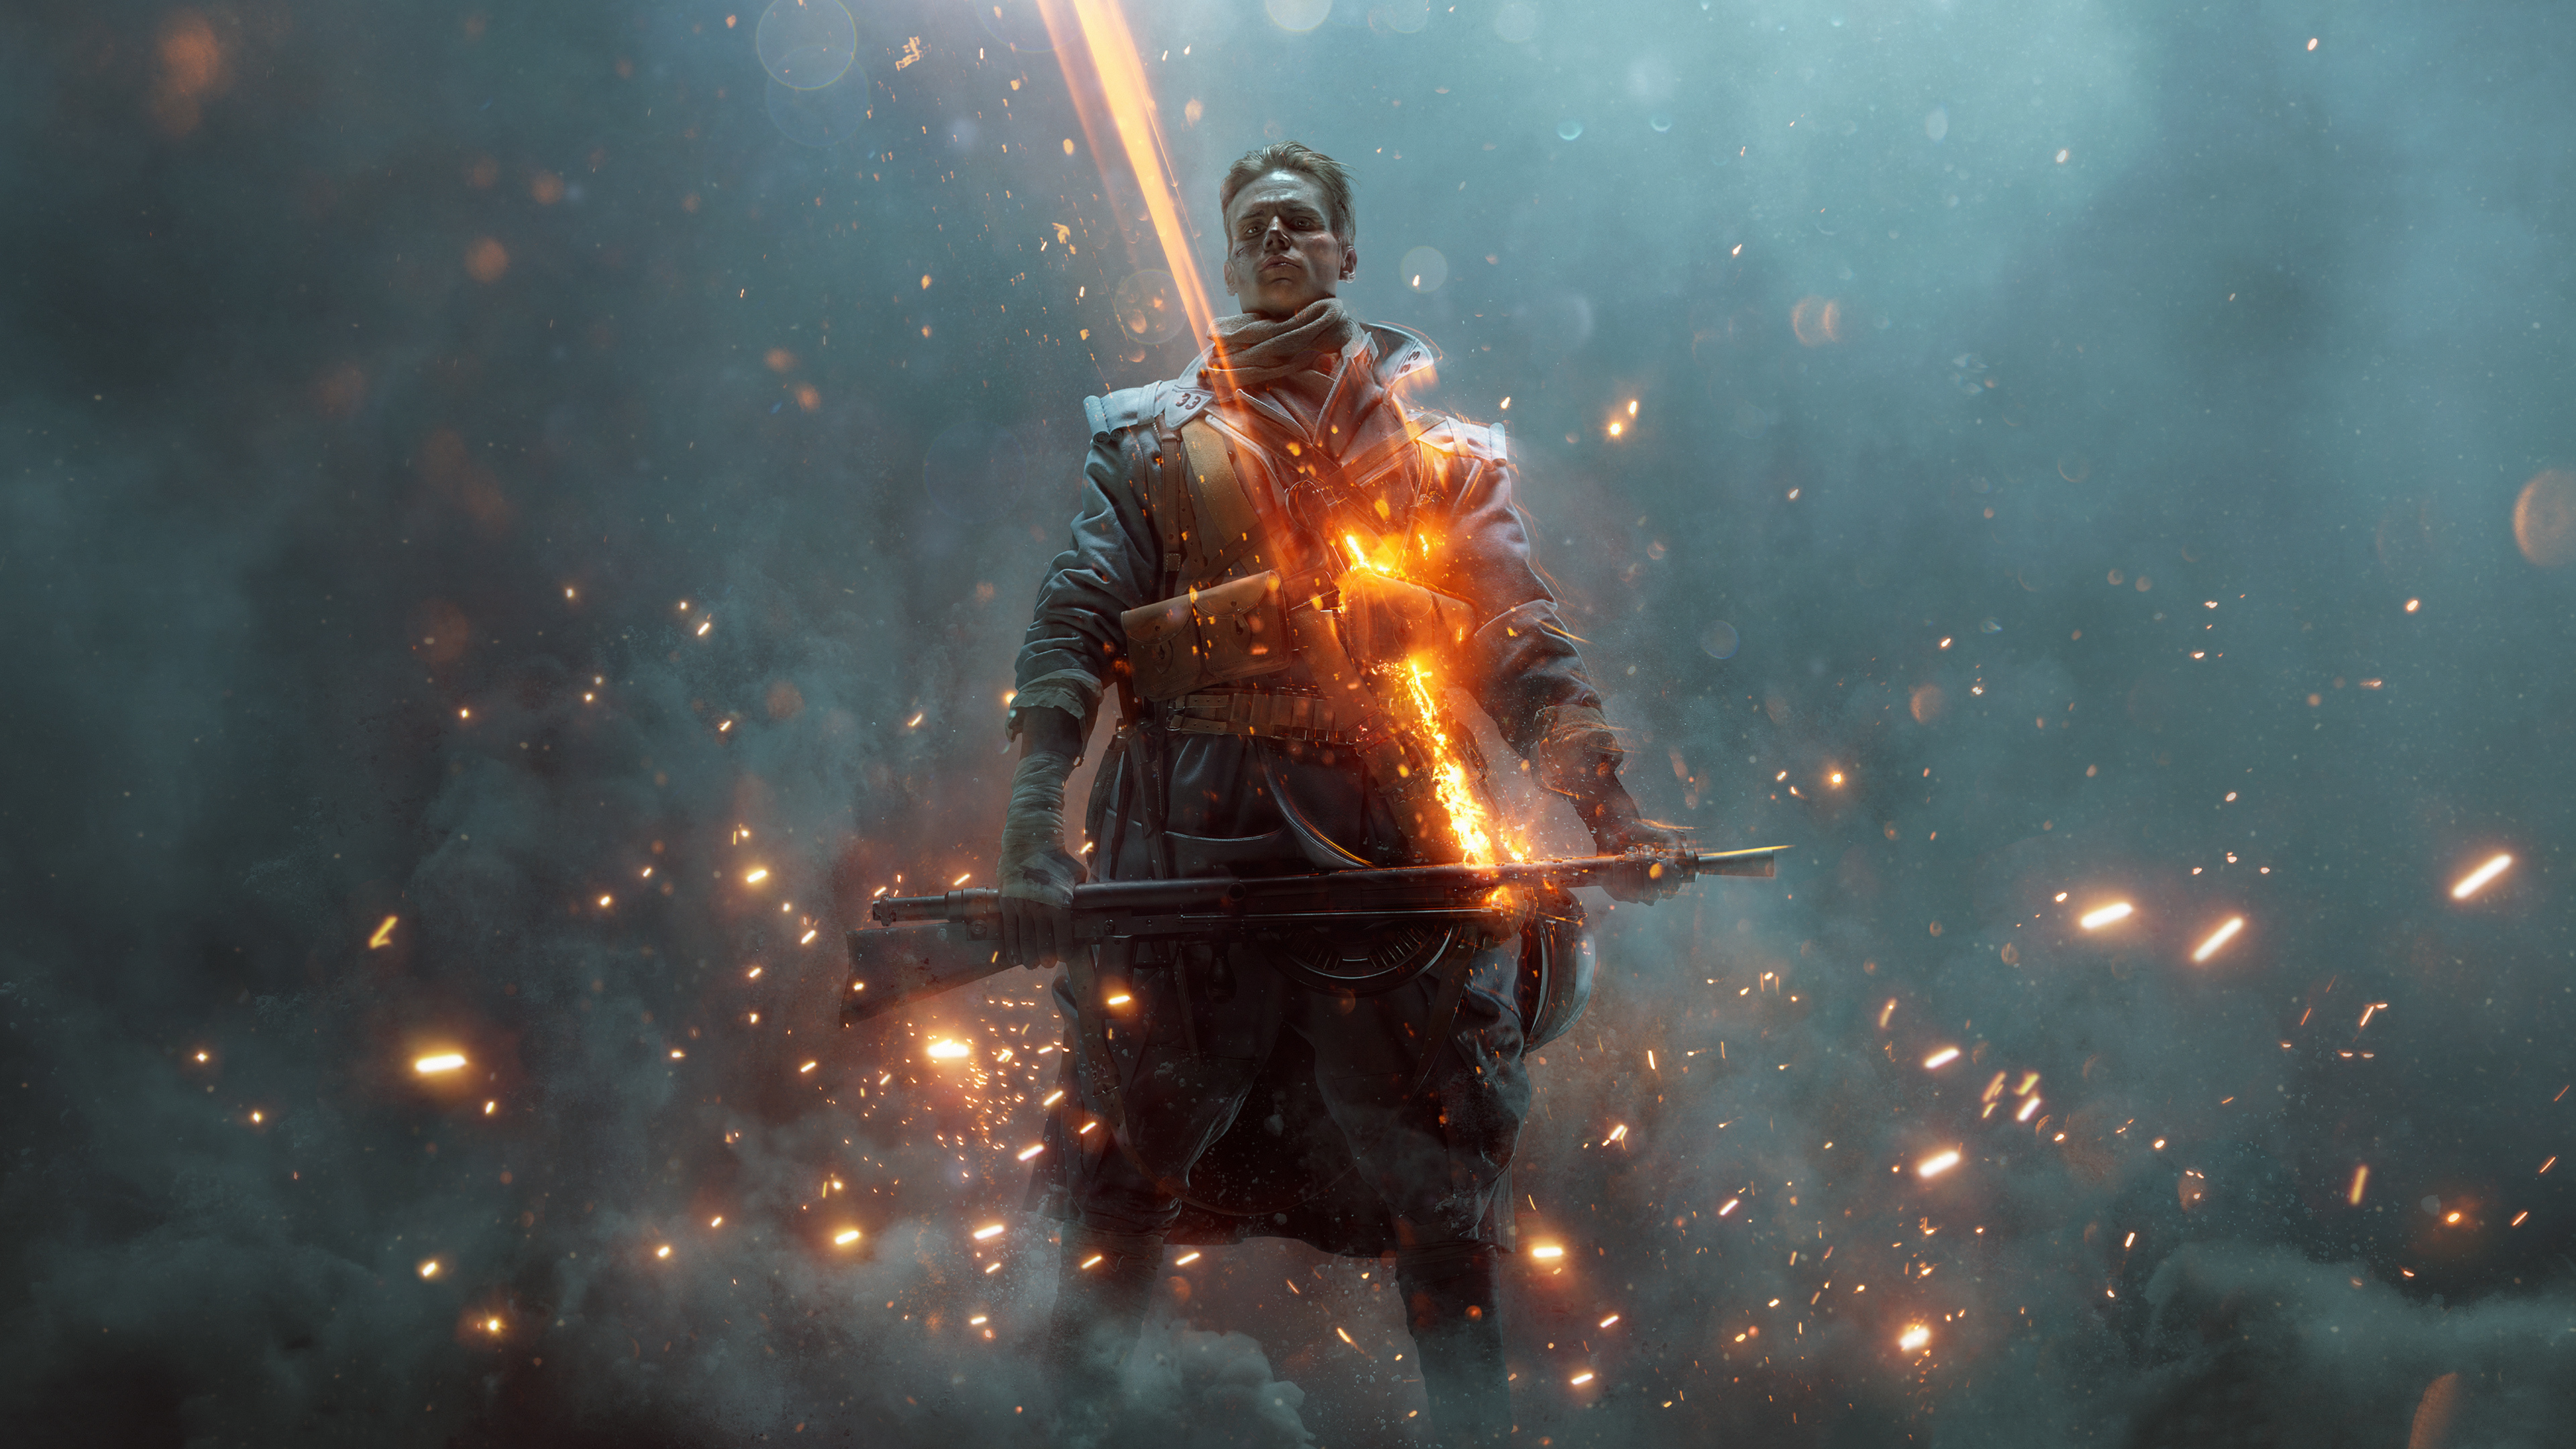 Battlefield 1, They Shall Not Pass, soldier, video game, 2017, 3840x2160 wallpaper